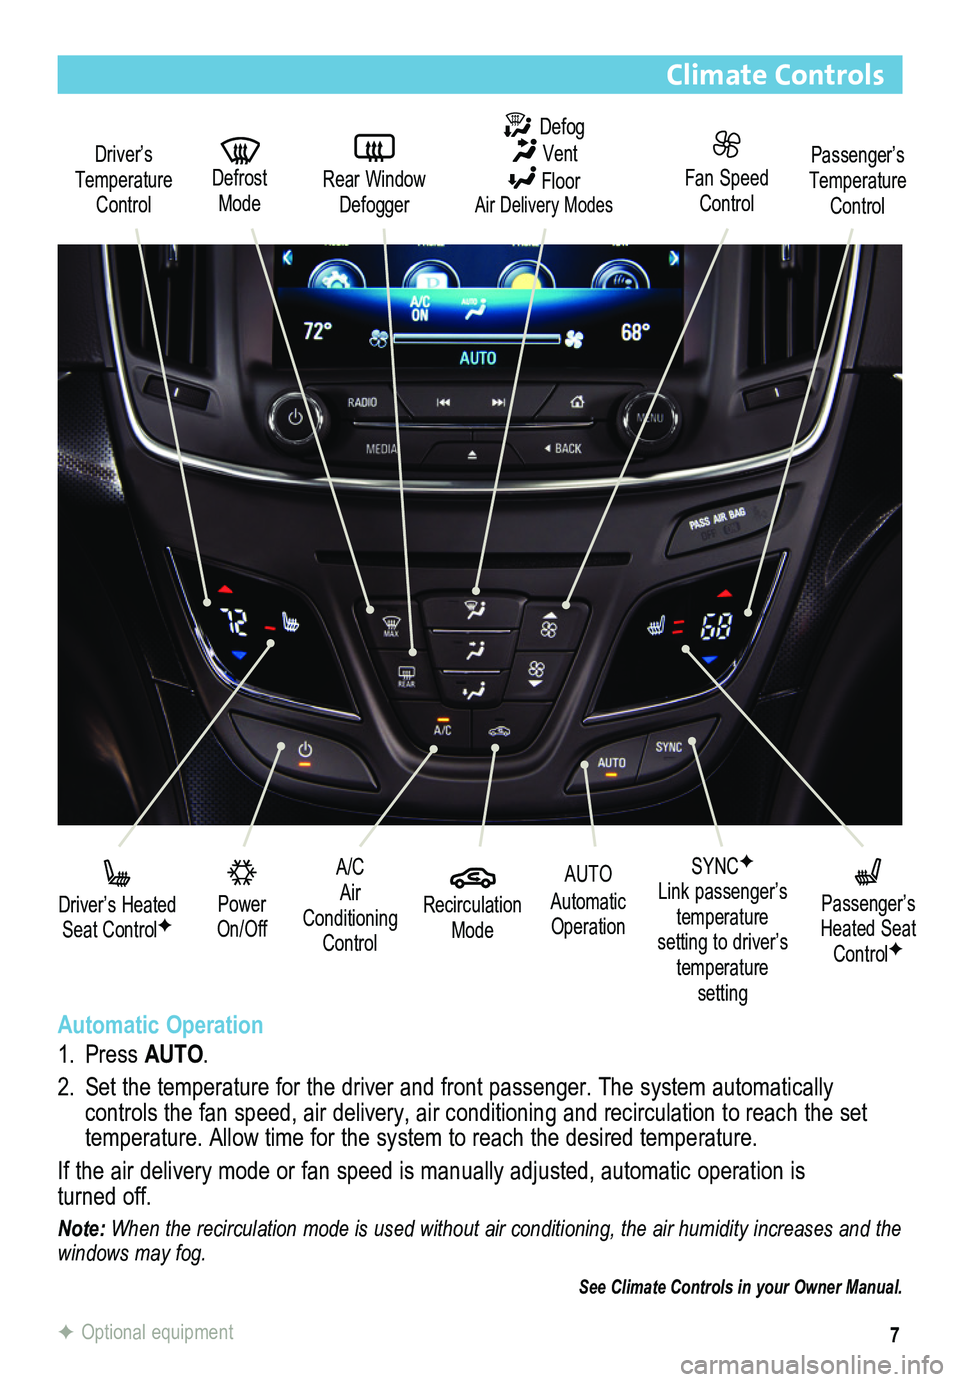 BUICK REGAL 2015  Get To Know Guide 7
Climate Controls
A/C Air Conditioning Control
  Power On/Off
Driver’s Temperature Control
 Driver’s Heated Seat ControlF
  Recirculation Mode
  Fan Speed Control
AUTO 
Automatic Operation
   Def